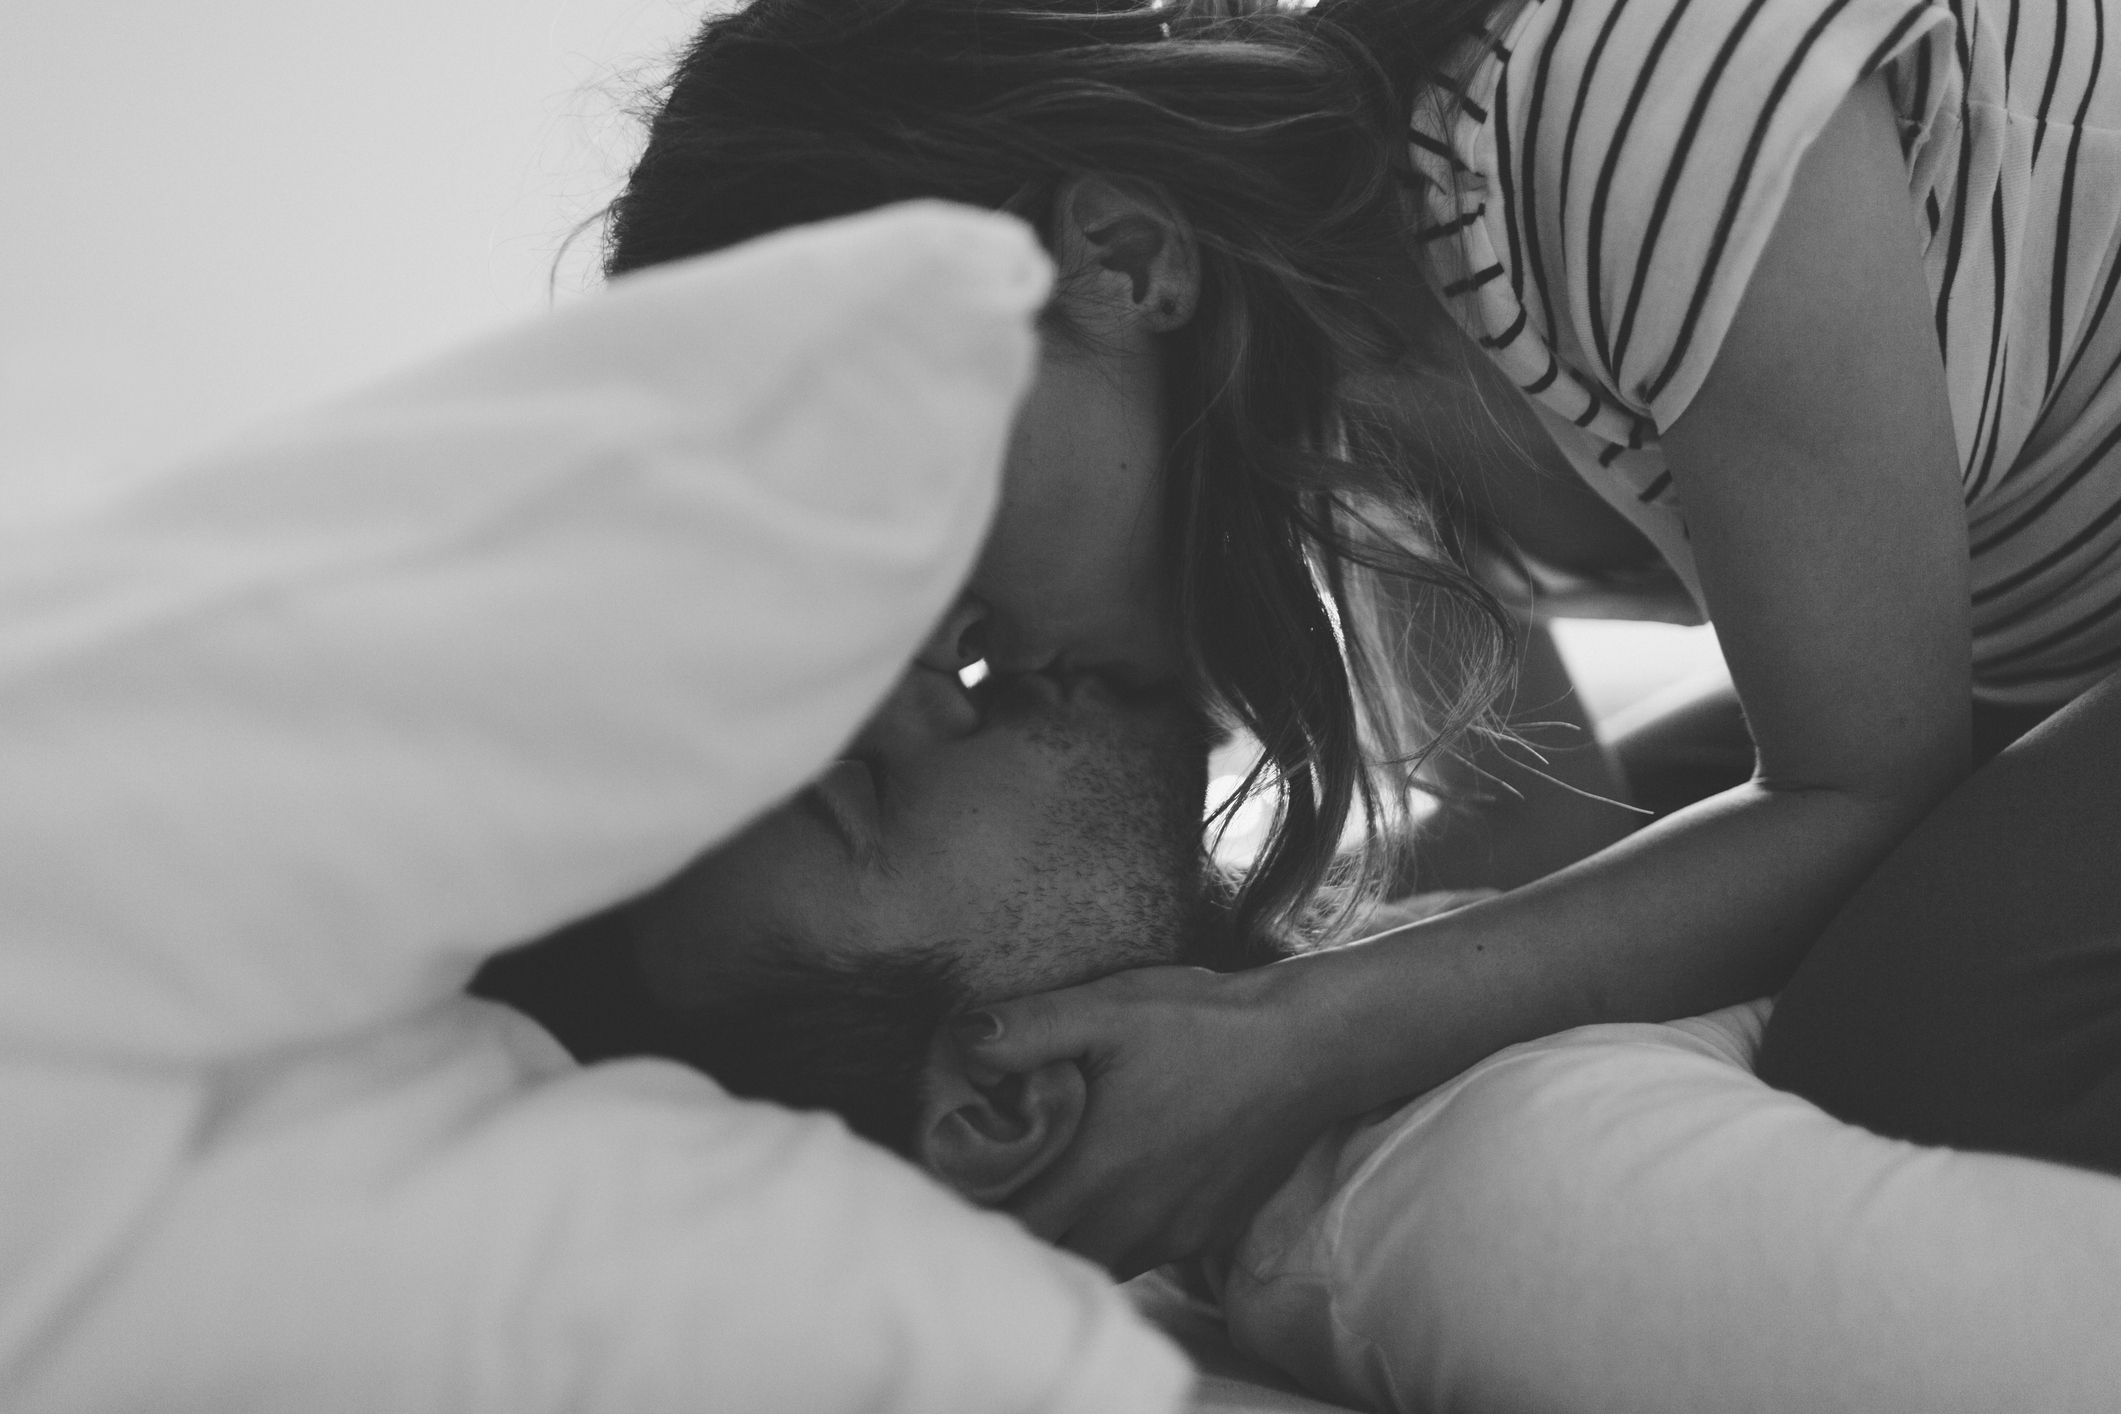 How to be on top of a guy in bed Love Story Man And Woman Lie In Bed Hug Each Other And Laugh Happiness Couple Morning Bed Top View Black And White Photo Stock Photo Adobe Stock